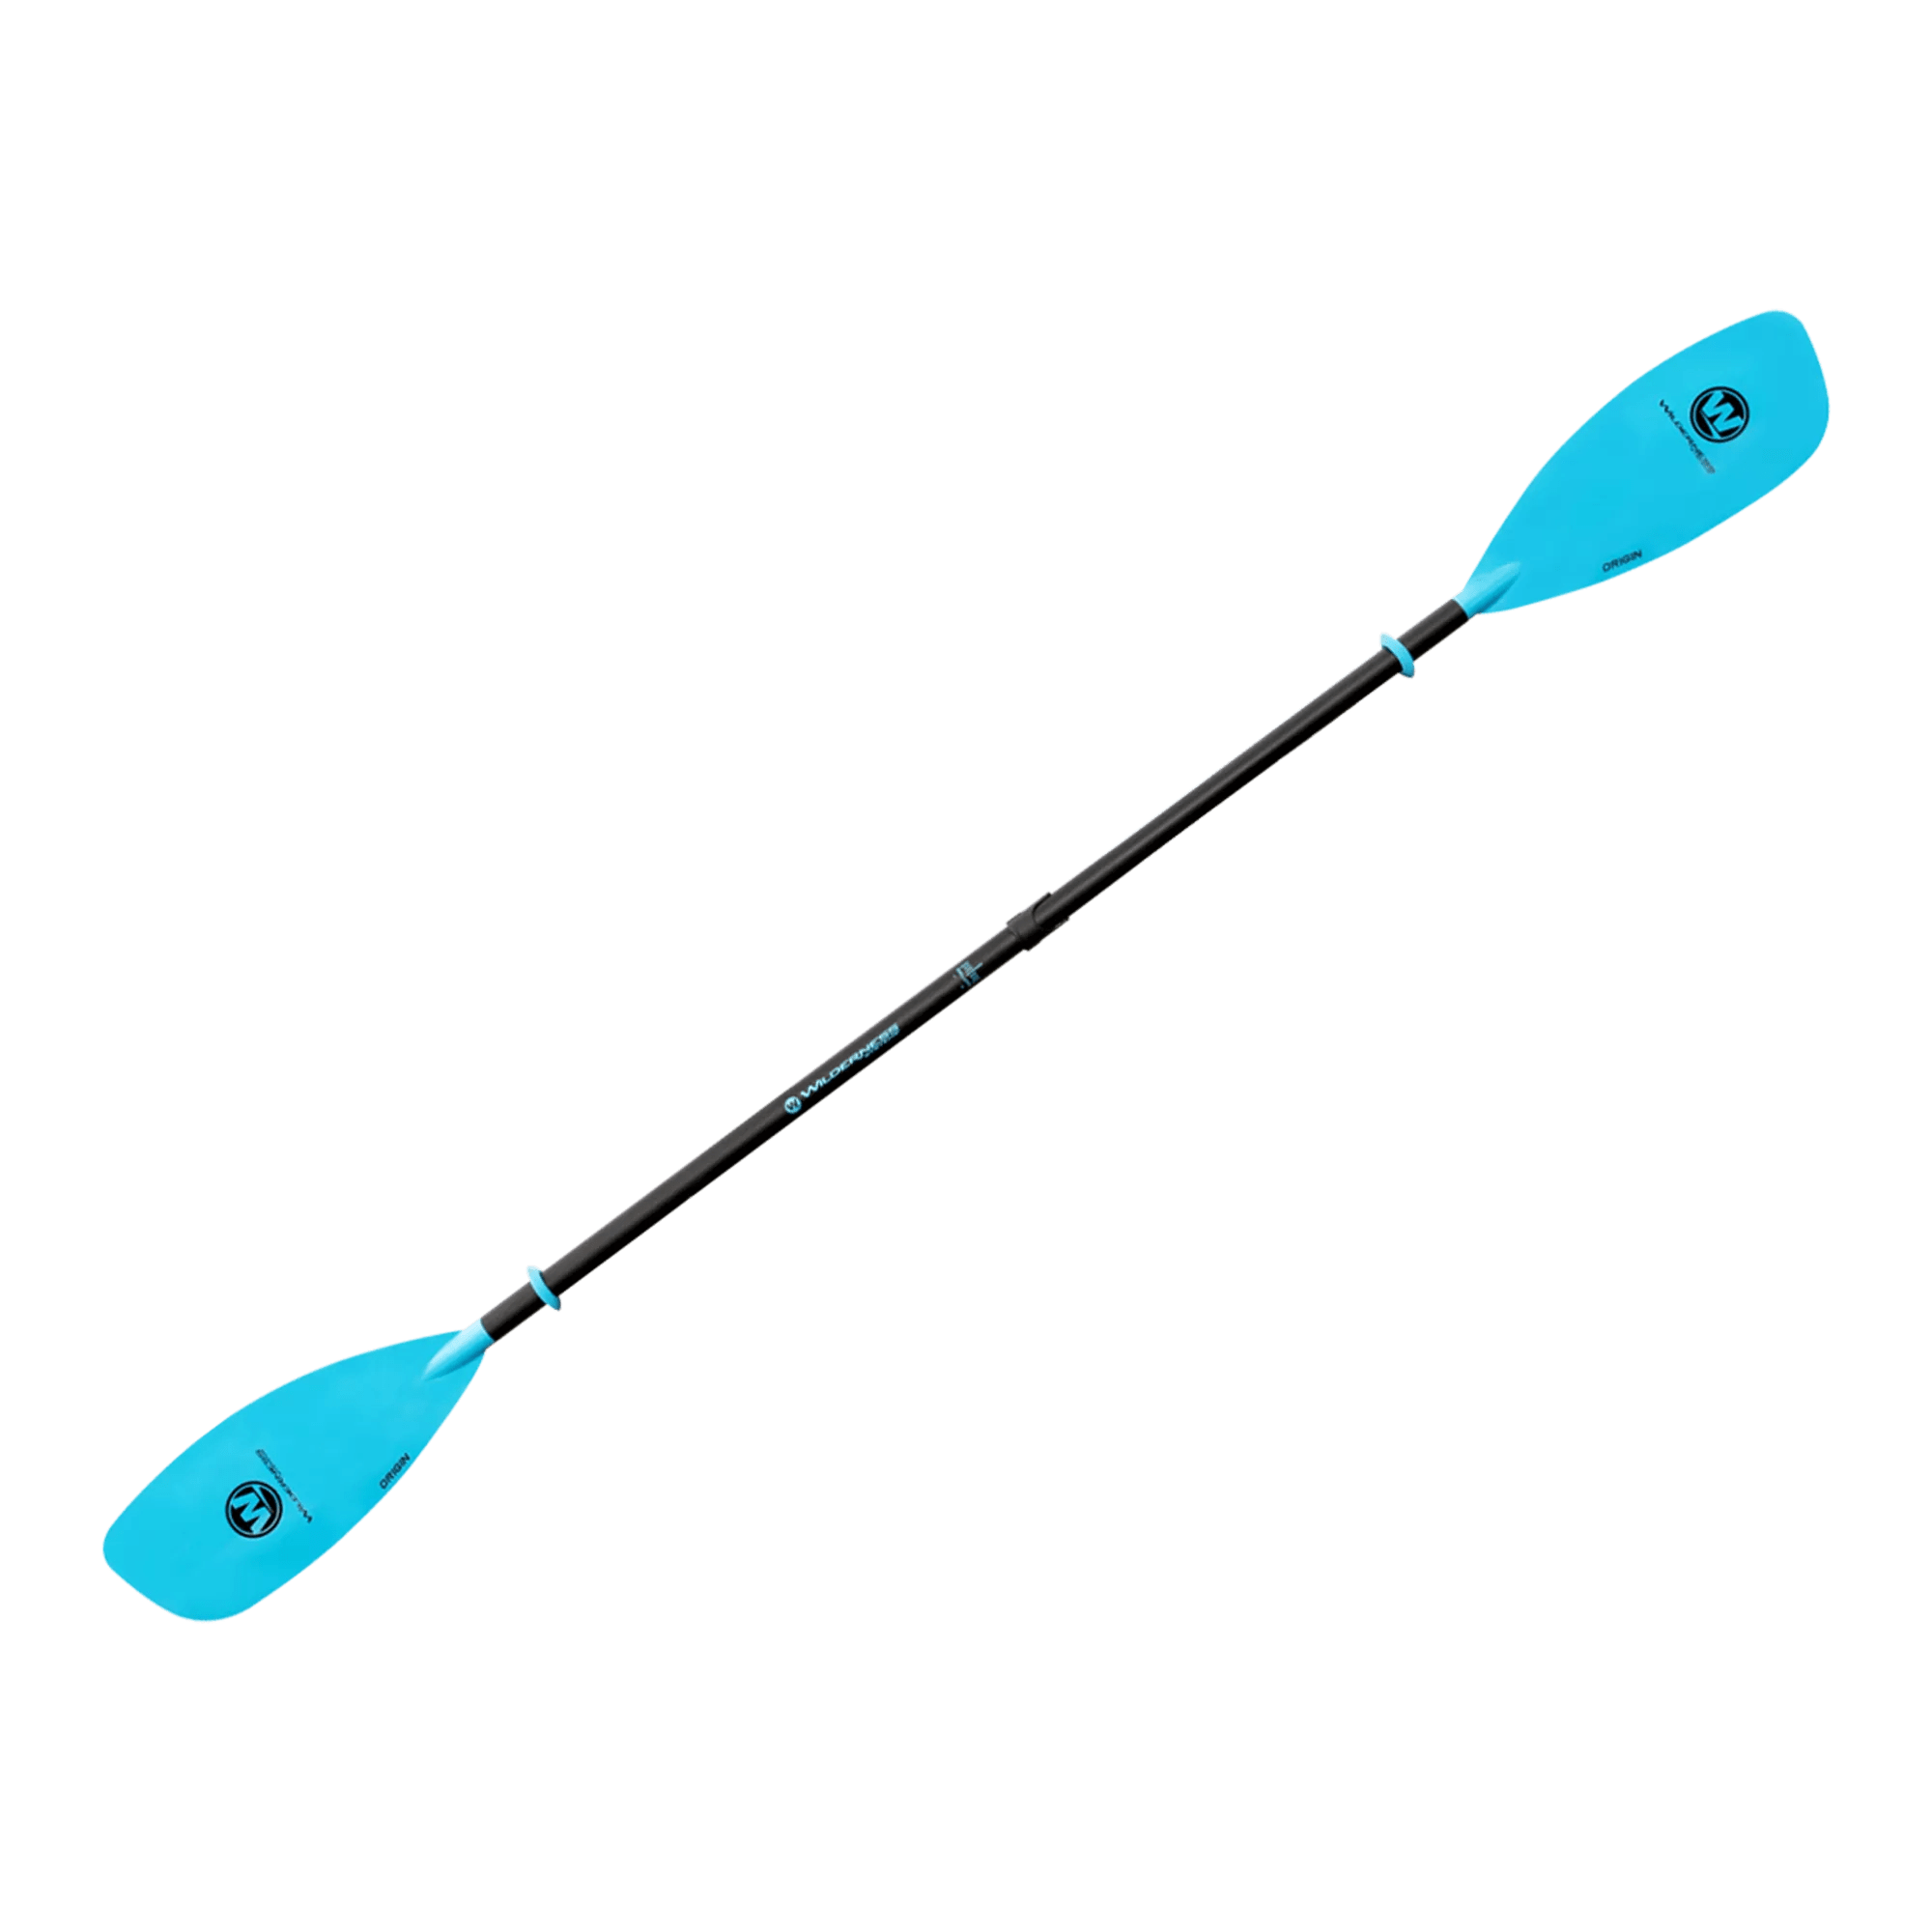 WILDERNESS SYSTEMS - Origin Glass Touring Paddle 220-240 cm - Blue - 8070207 - ISO 